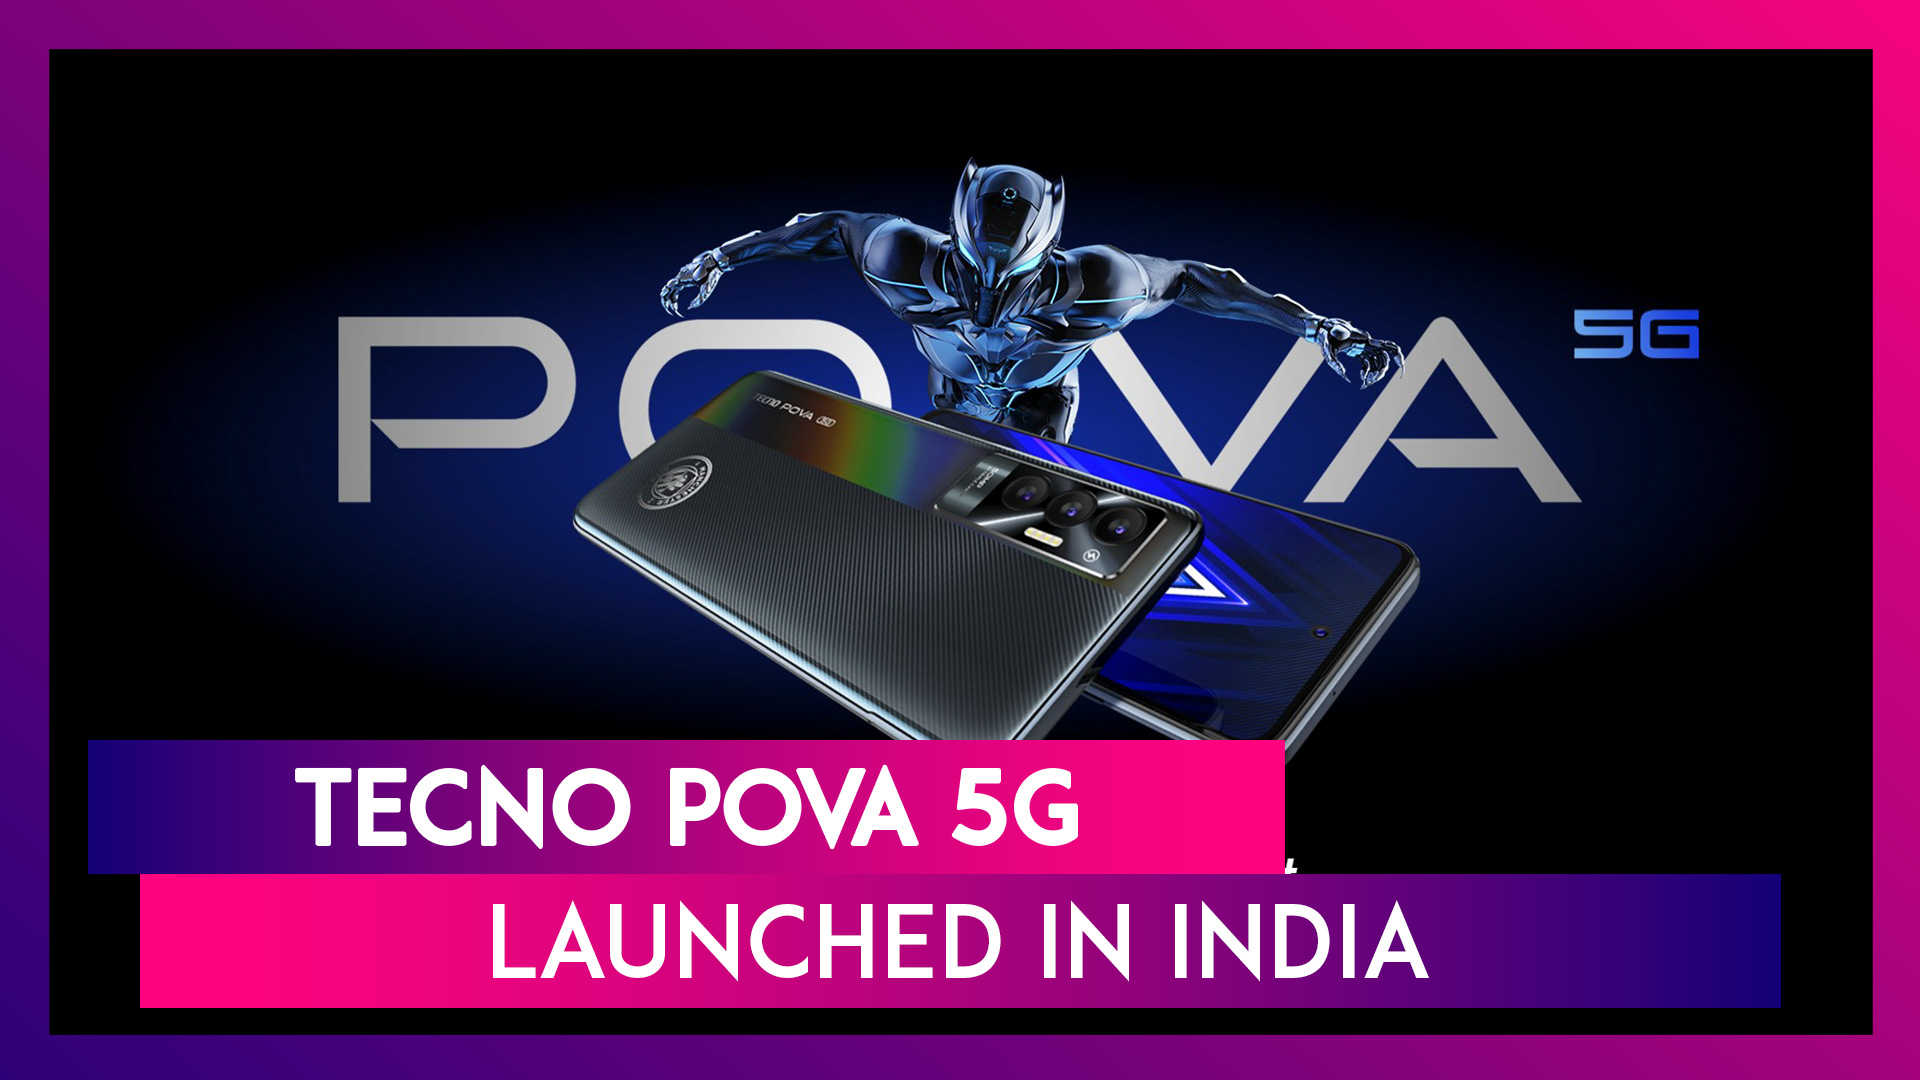 Tecno Pova 5G Mobile Launched In India, Goes On Sale From February 14